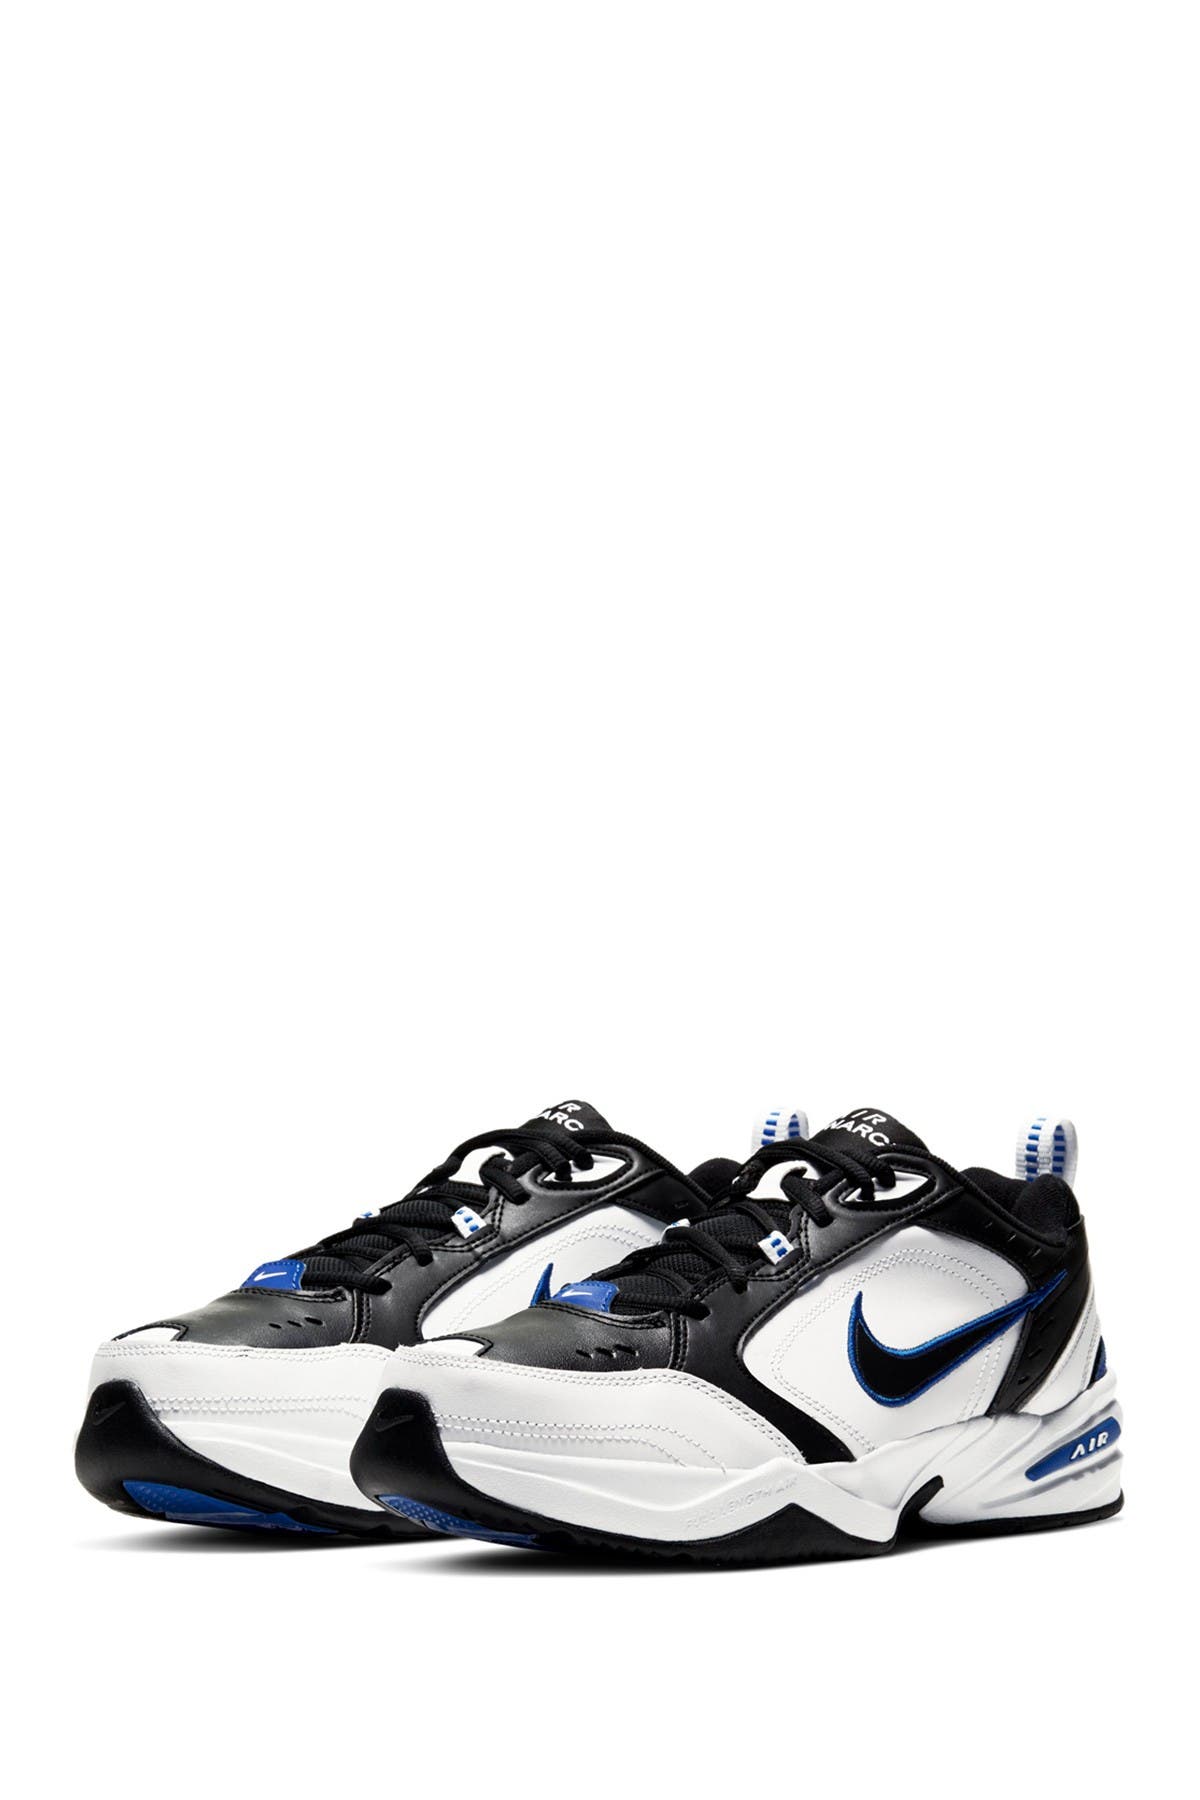 NIKE AIR MONARCH IV 4E TRAINING SNEAKER - EXTRA WIDE WIDTH